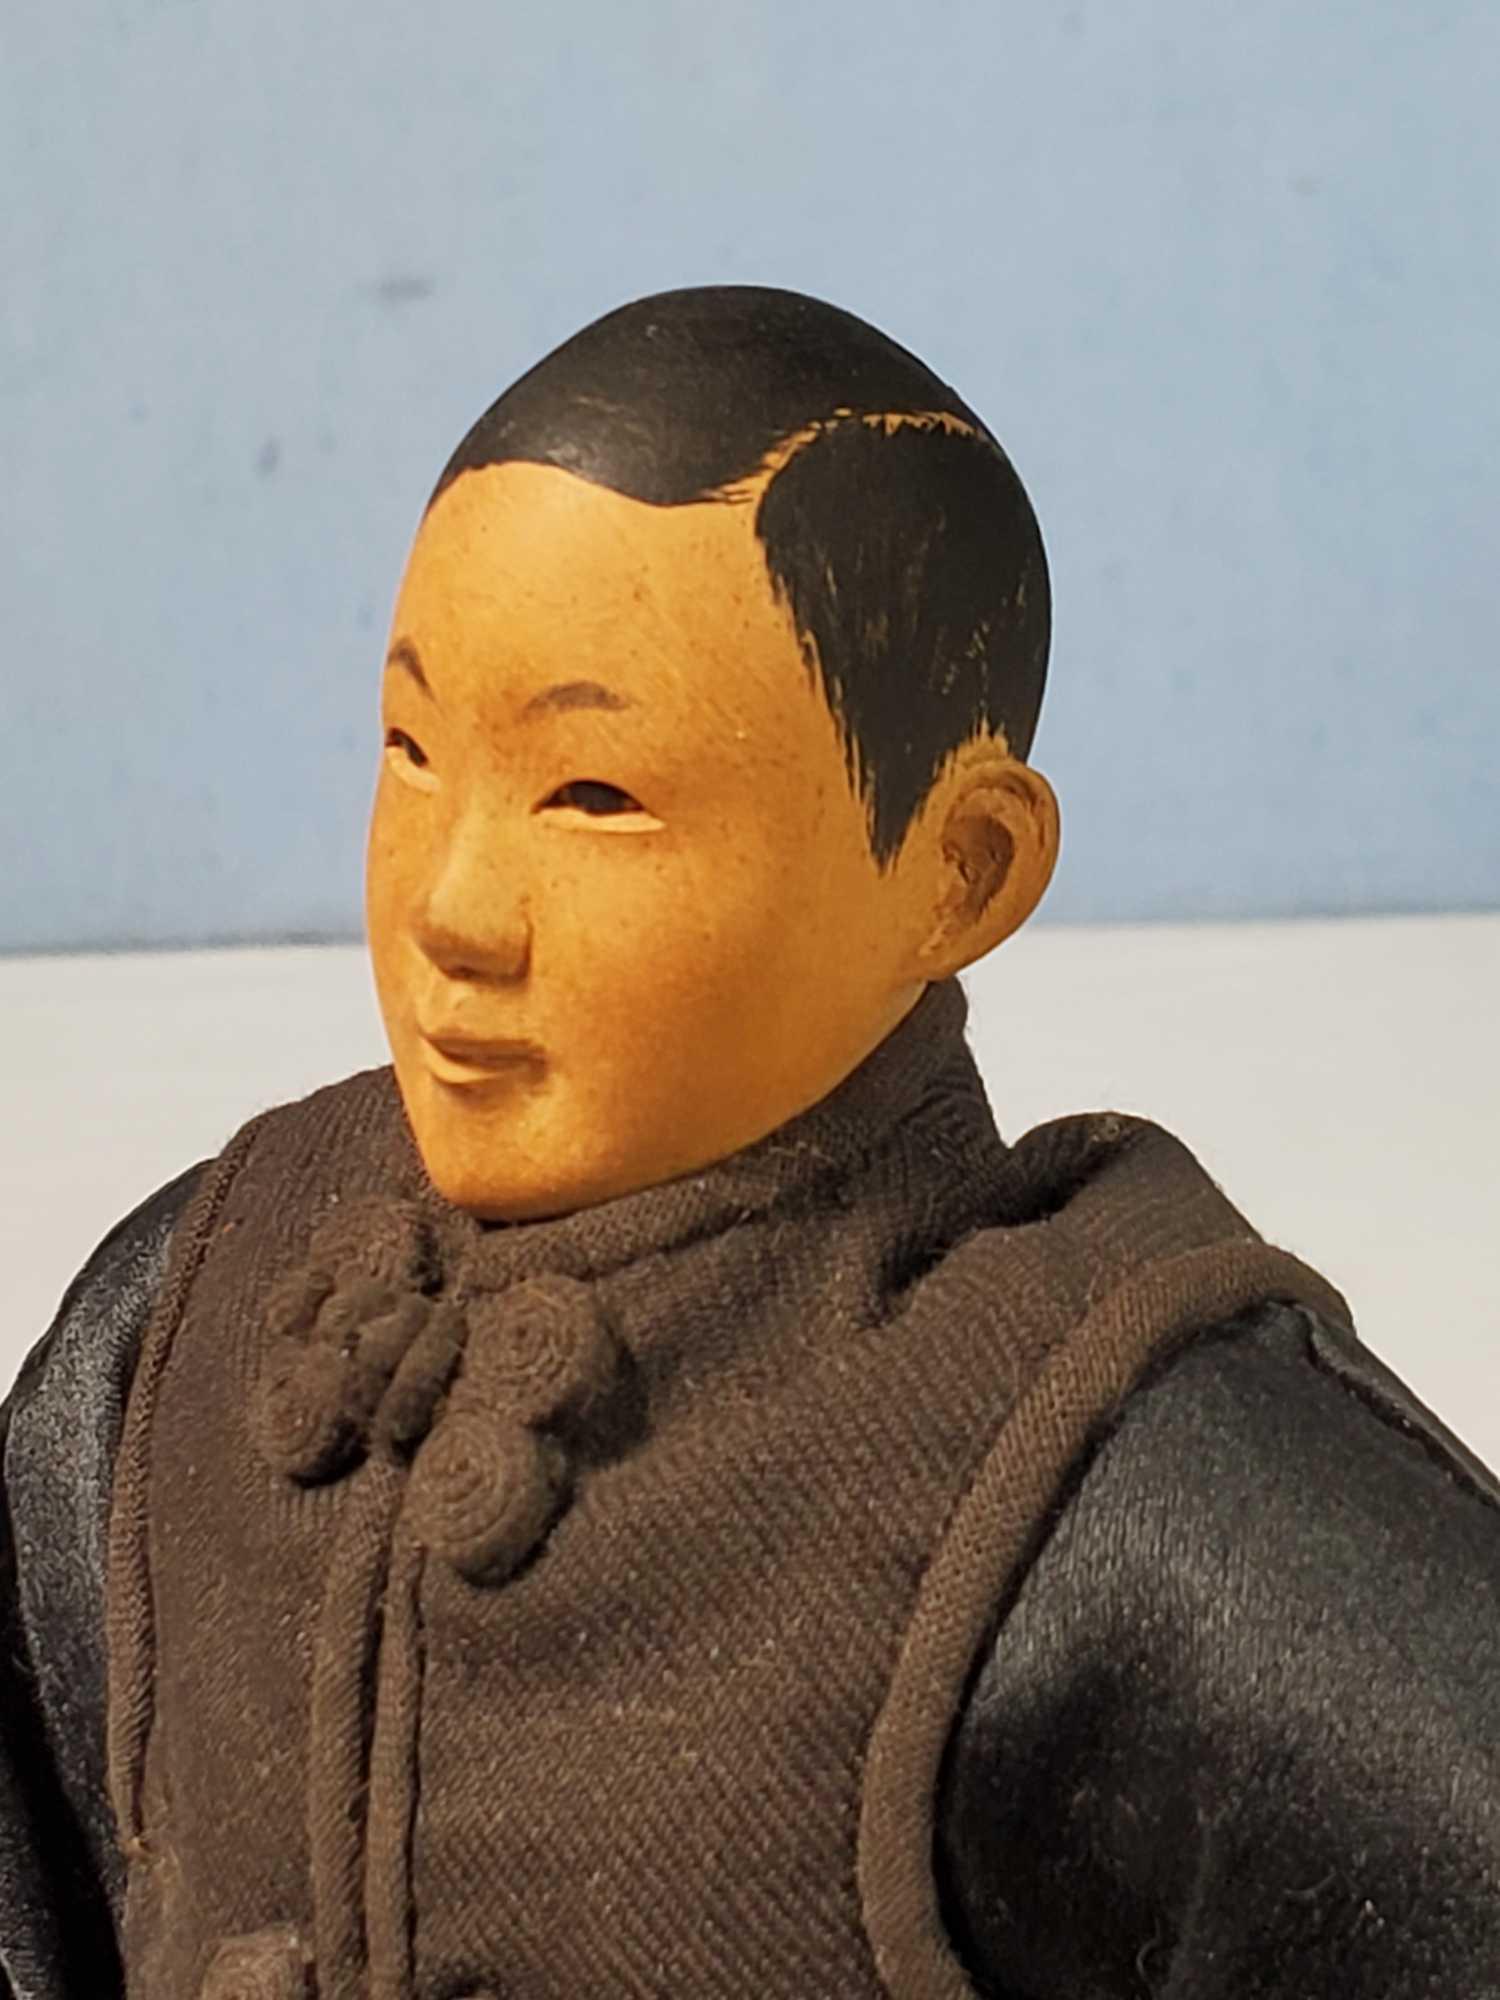 8" Rare Door of Hope Shanghai Mission Carved Pear Wood Head Boy Doll in Mourning Wear Dress